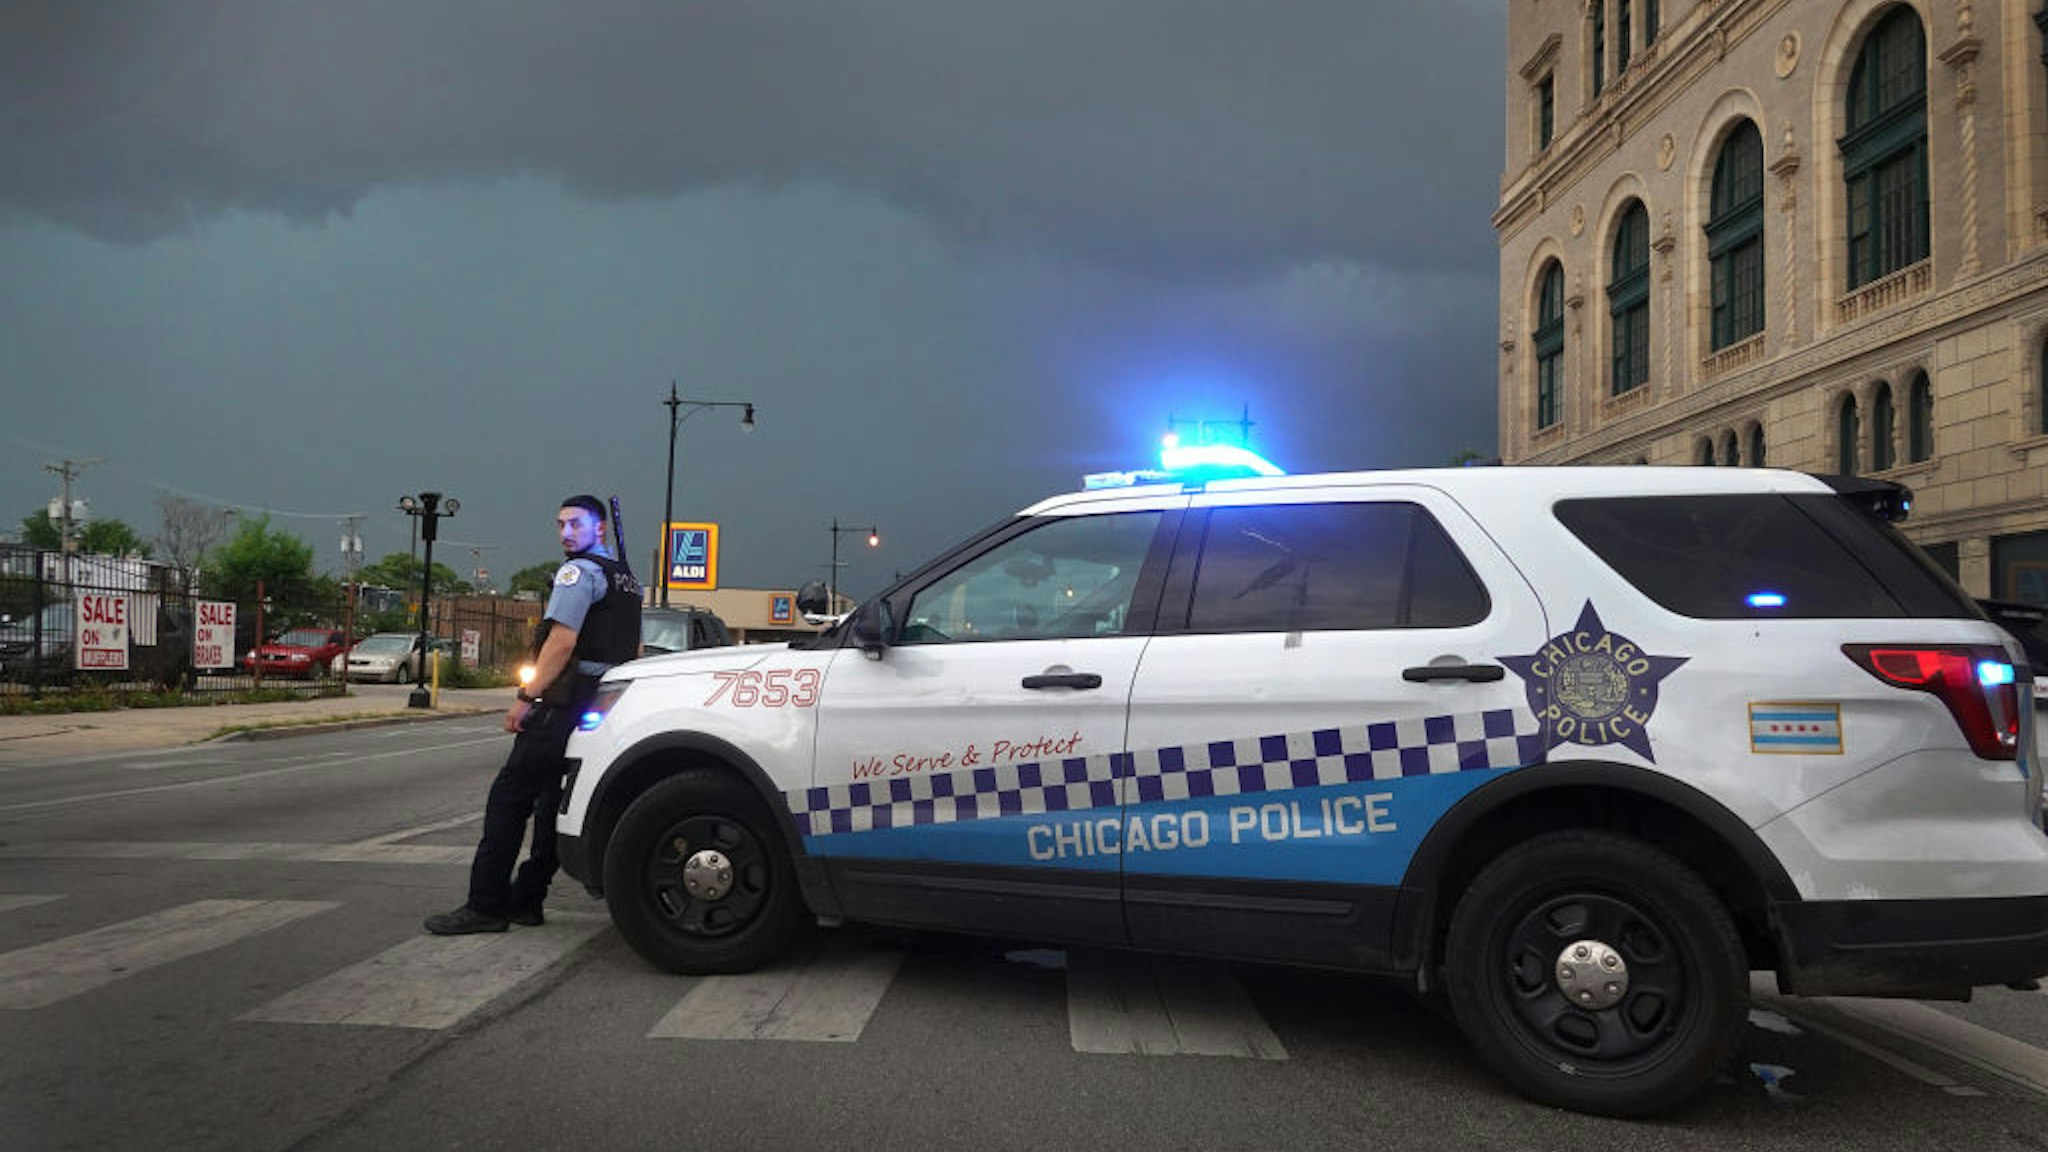 CHICAGO, ILLINOIS - AUGUST 10: A police officer stands guard following unrest on the city's westside moments before a derecho storm hits the area on August 10, 2020 in Chicago, Illinois. The storm, with winds gusts close to 100 miles per hour, downed trees and power lines as it moved through the city and suburbs. (Photo by Scott Olson/Getty Images)